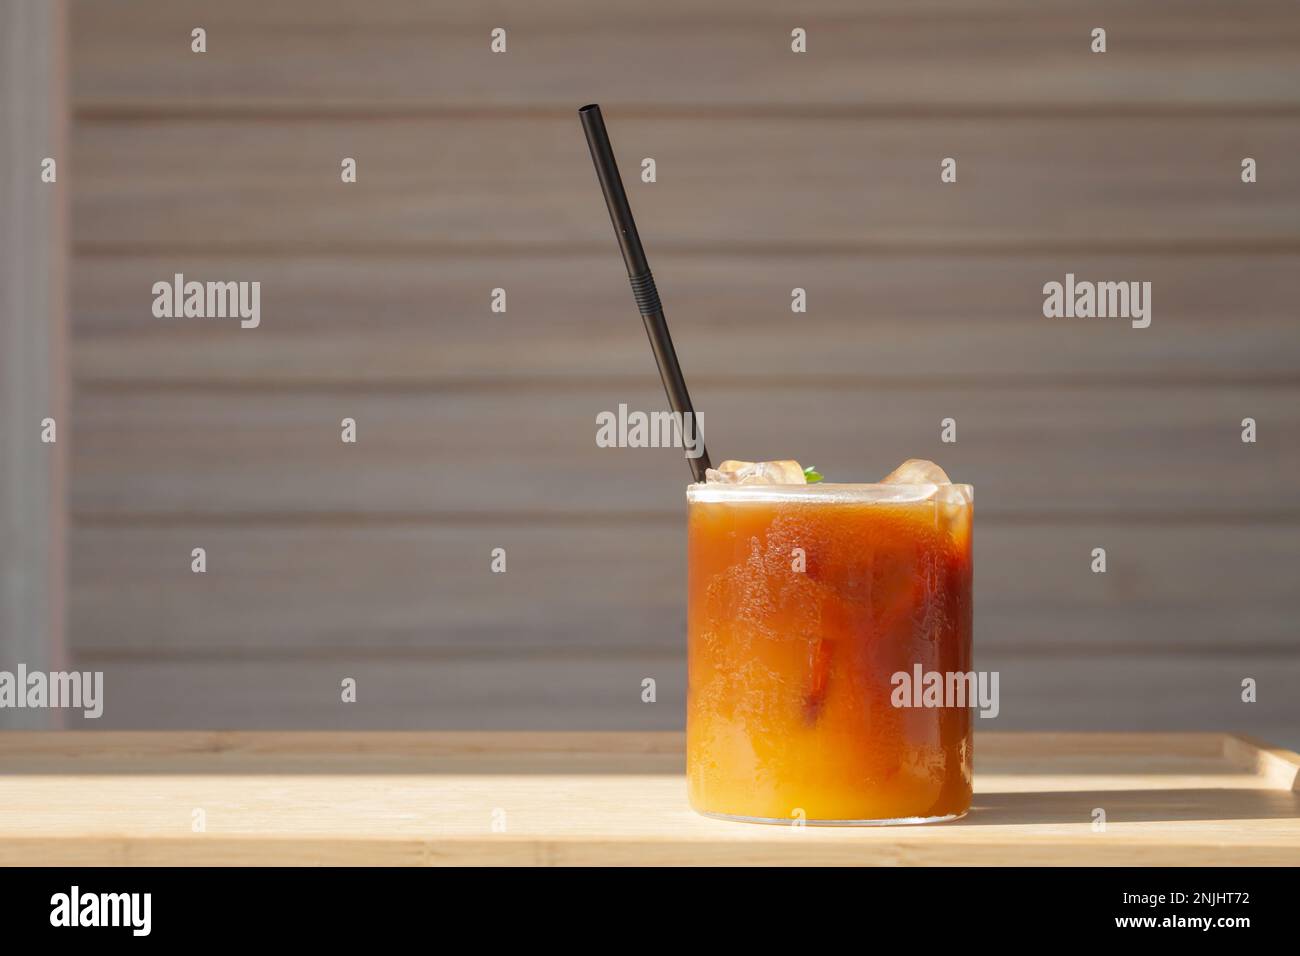 Iced coffee with orange in coffee shop, stock photo Stock Photo